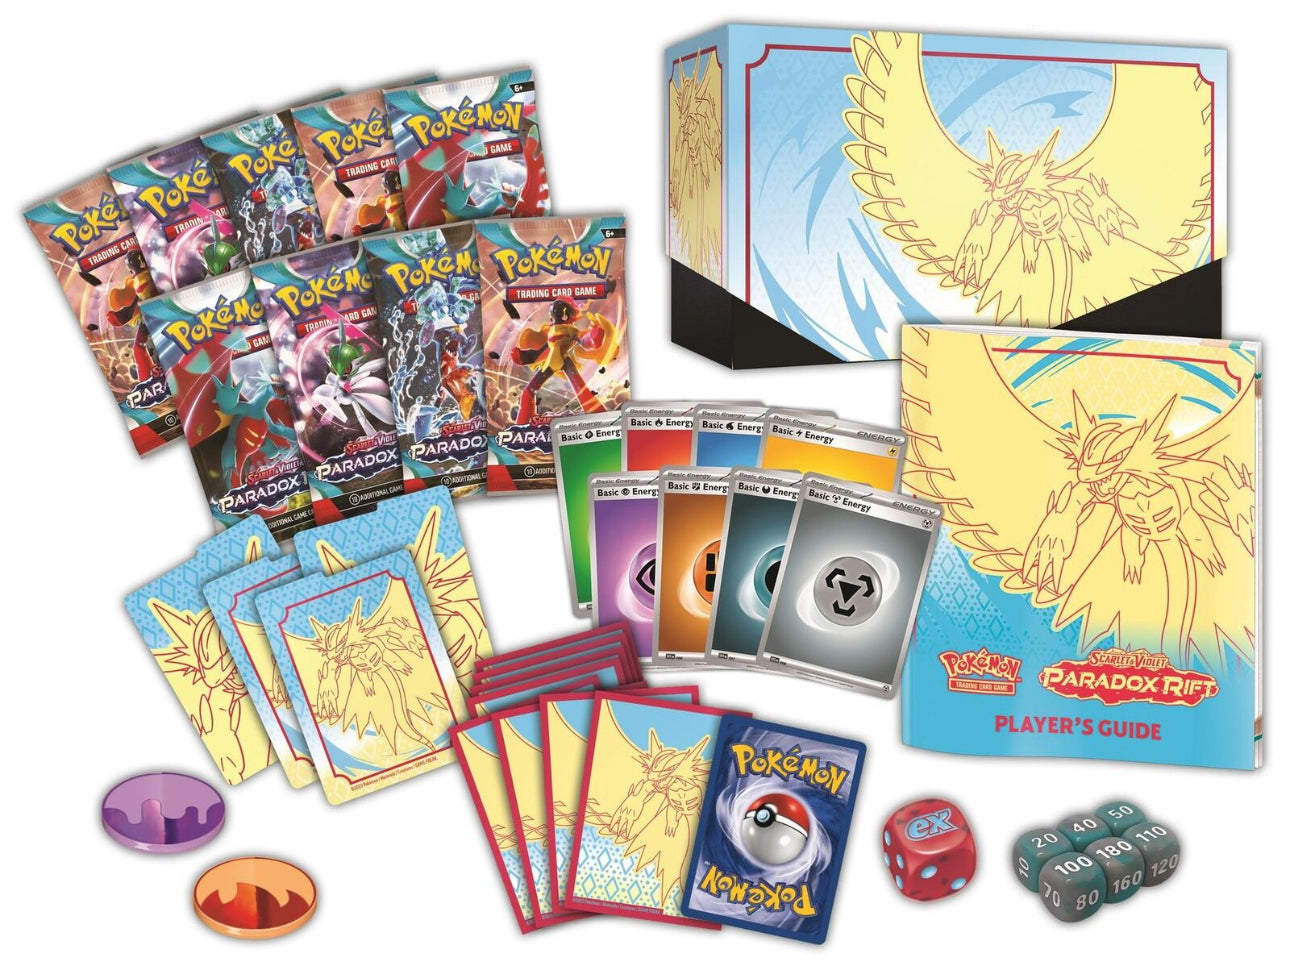 Paradox Rift Elite Trainer Box featuring either Roaring Moon or Iron Valiant